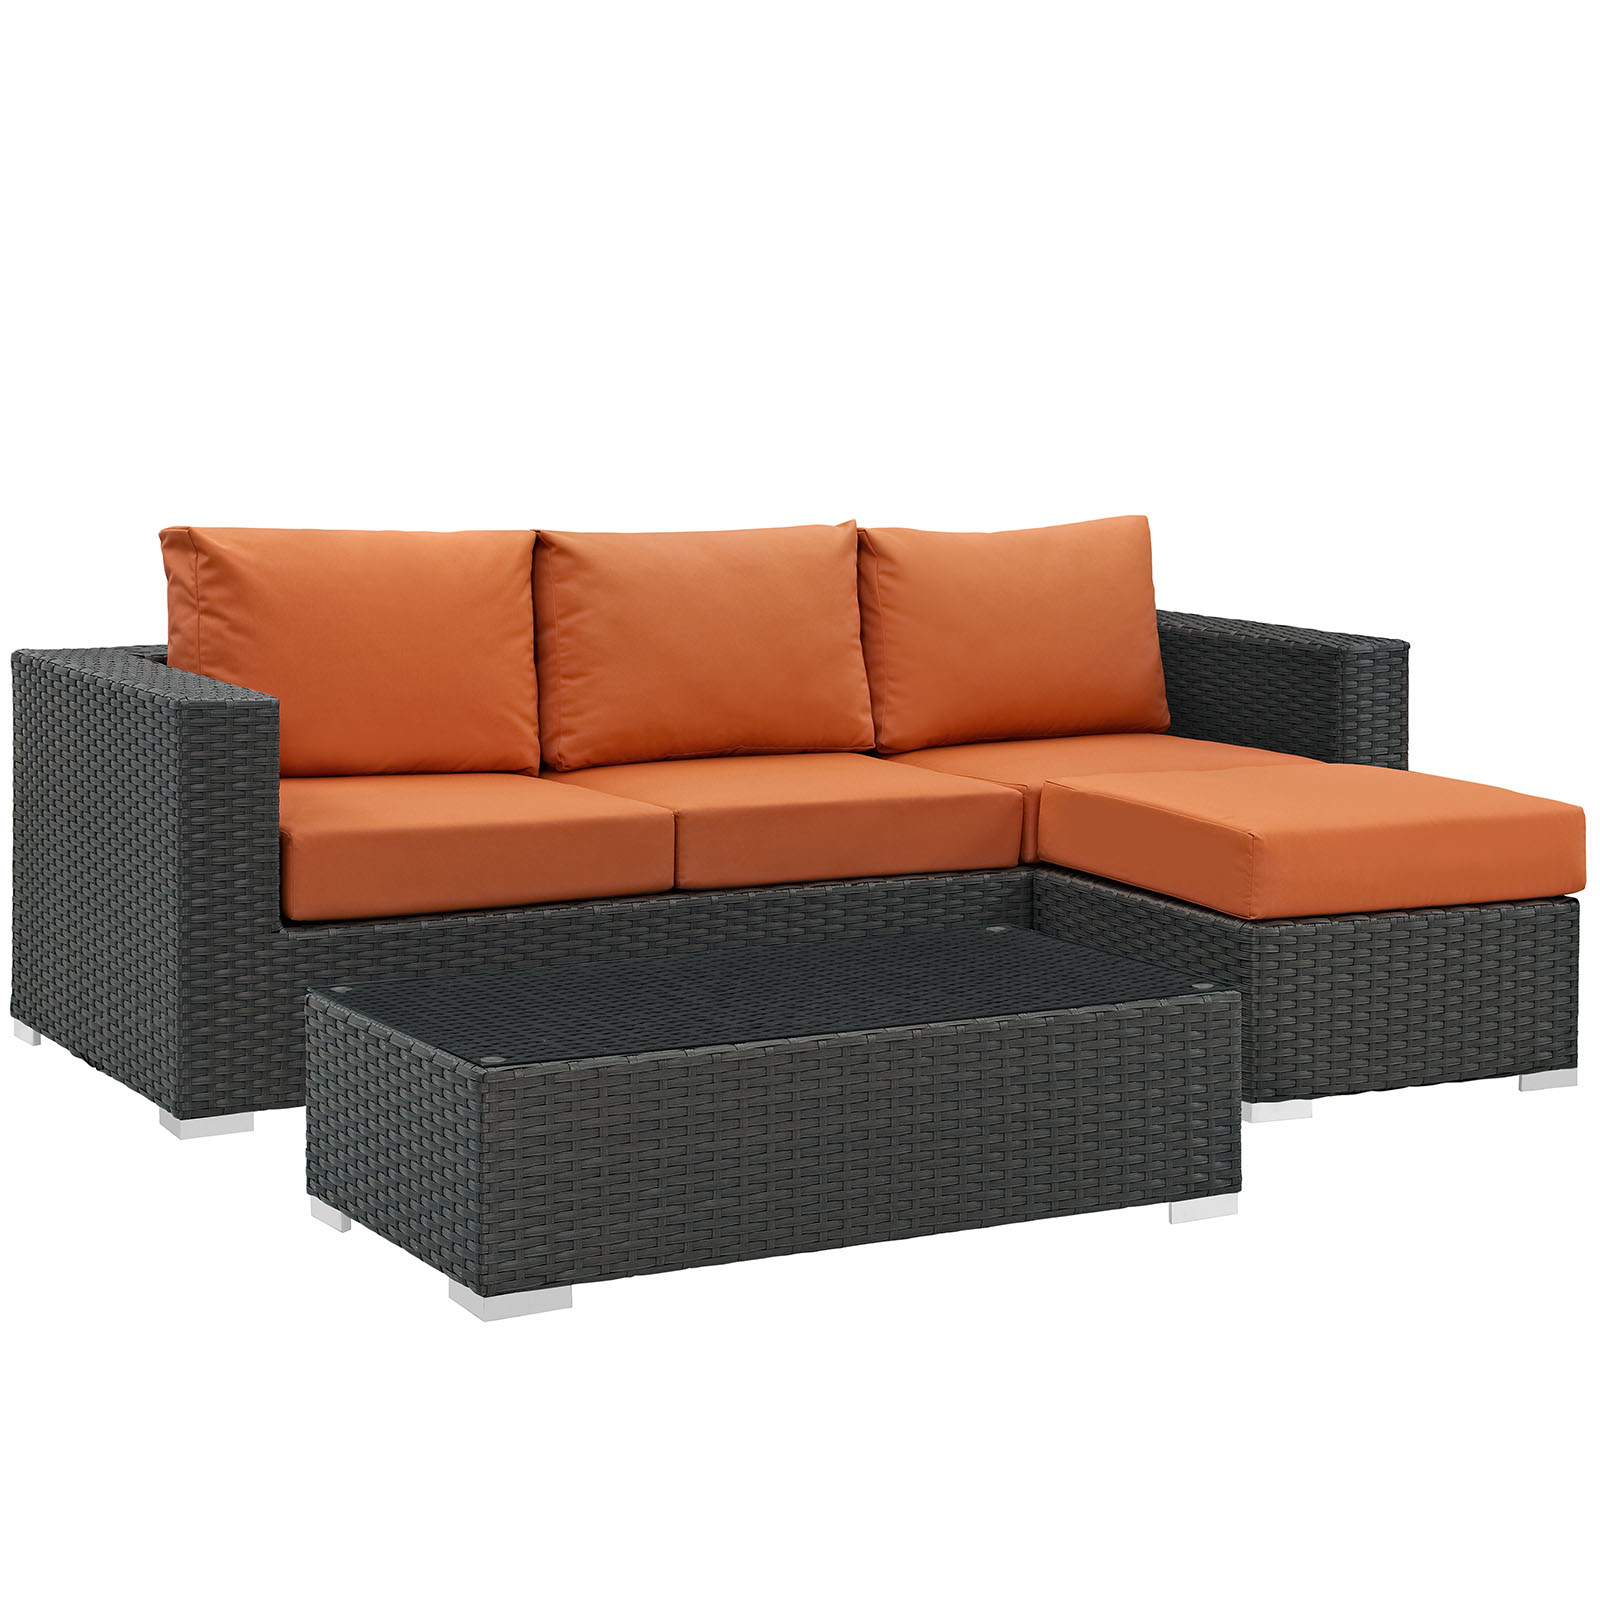 Modway Sojourn 3 Piece Outdoor Patio Sunbrella? Sectional Set in Canvas Tuscan - image 2 of 7